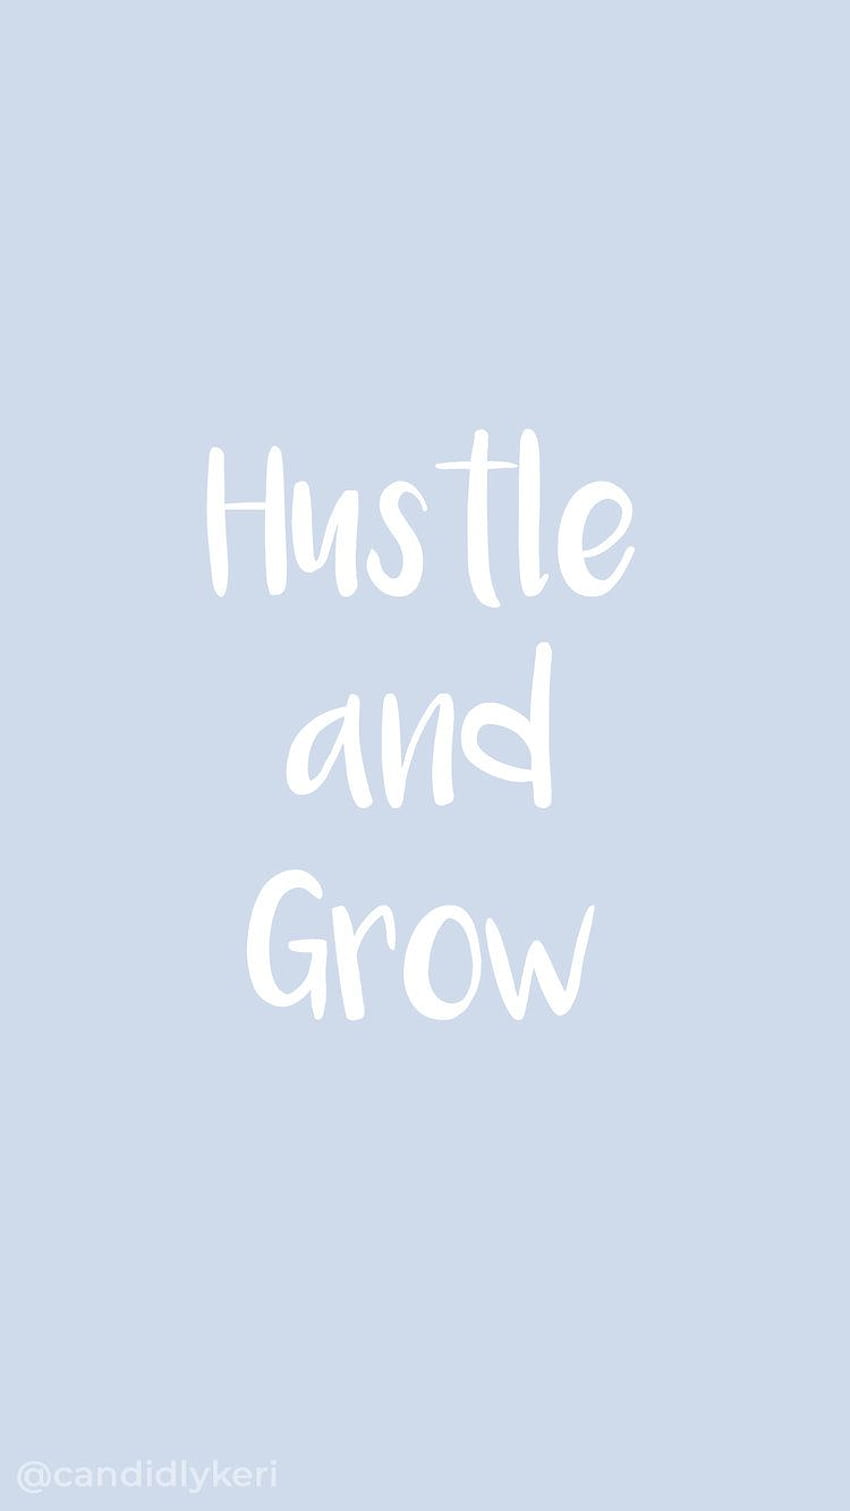 Hustle And Grow blue handwritten font quote inspirational background you can for on. Inspirational background, Blue quotes, Fonts quotes HD phone wallpaper